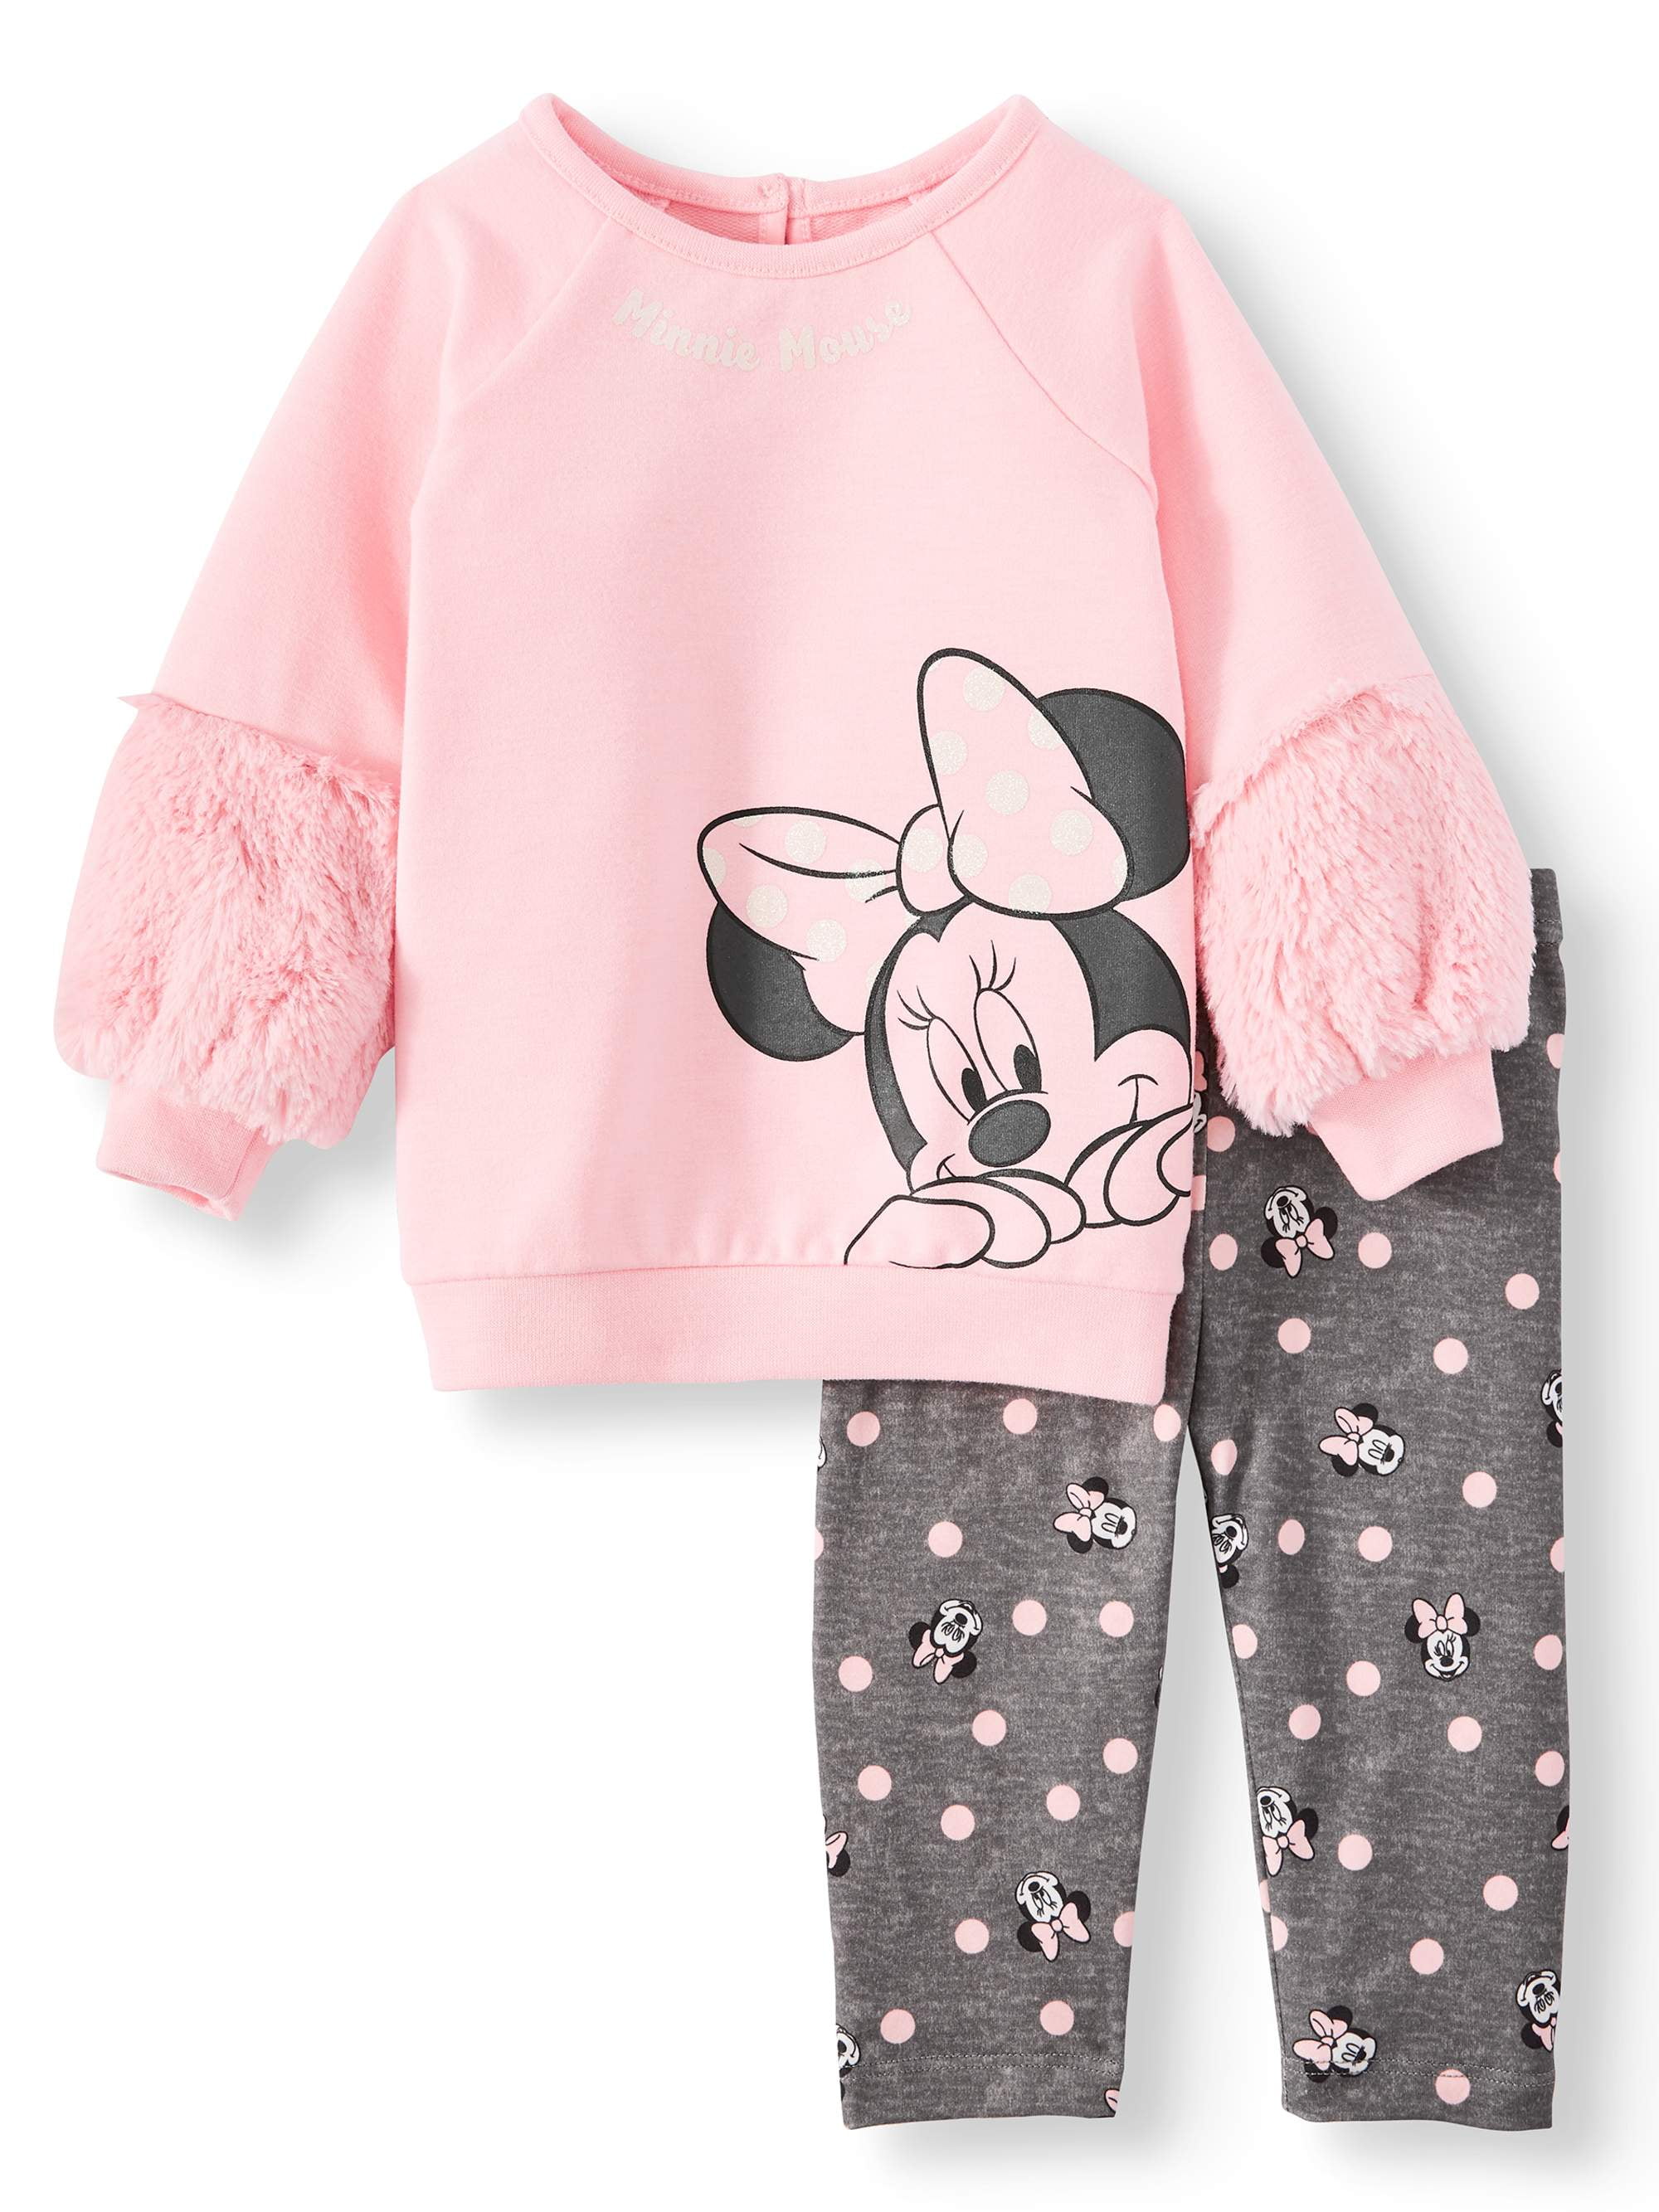 Disney Minnie Mouse Baby Girls Outfit Clothes Set Party Top Leggings 9-36 Months